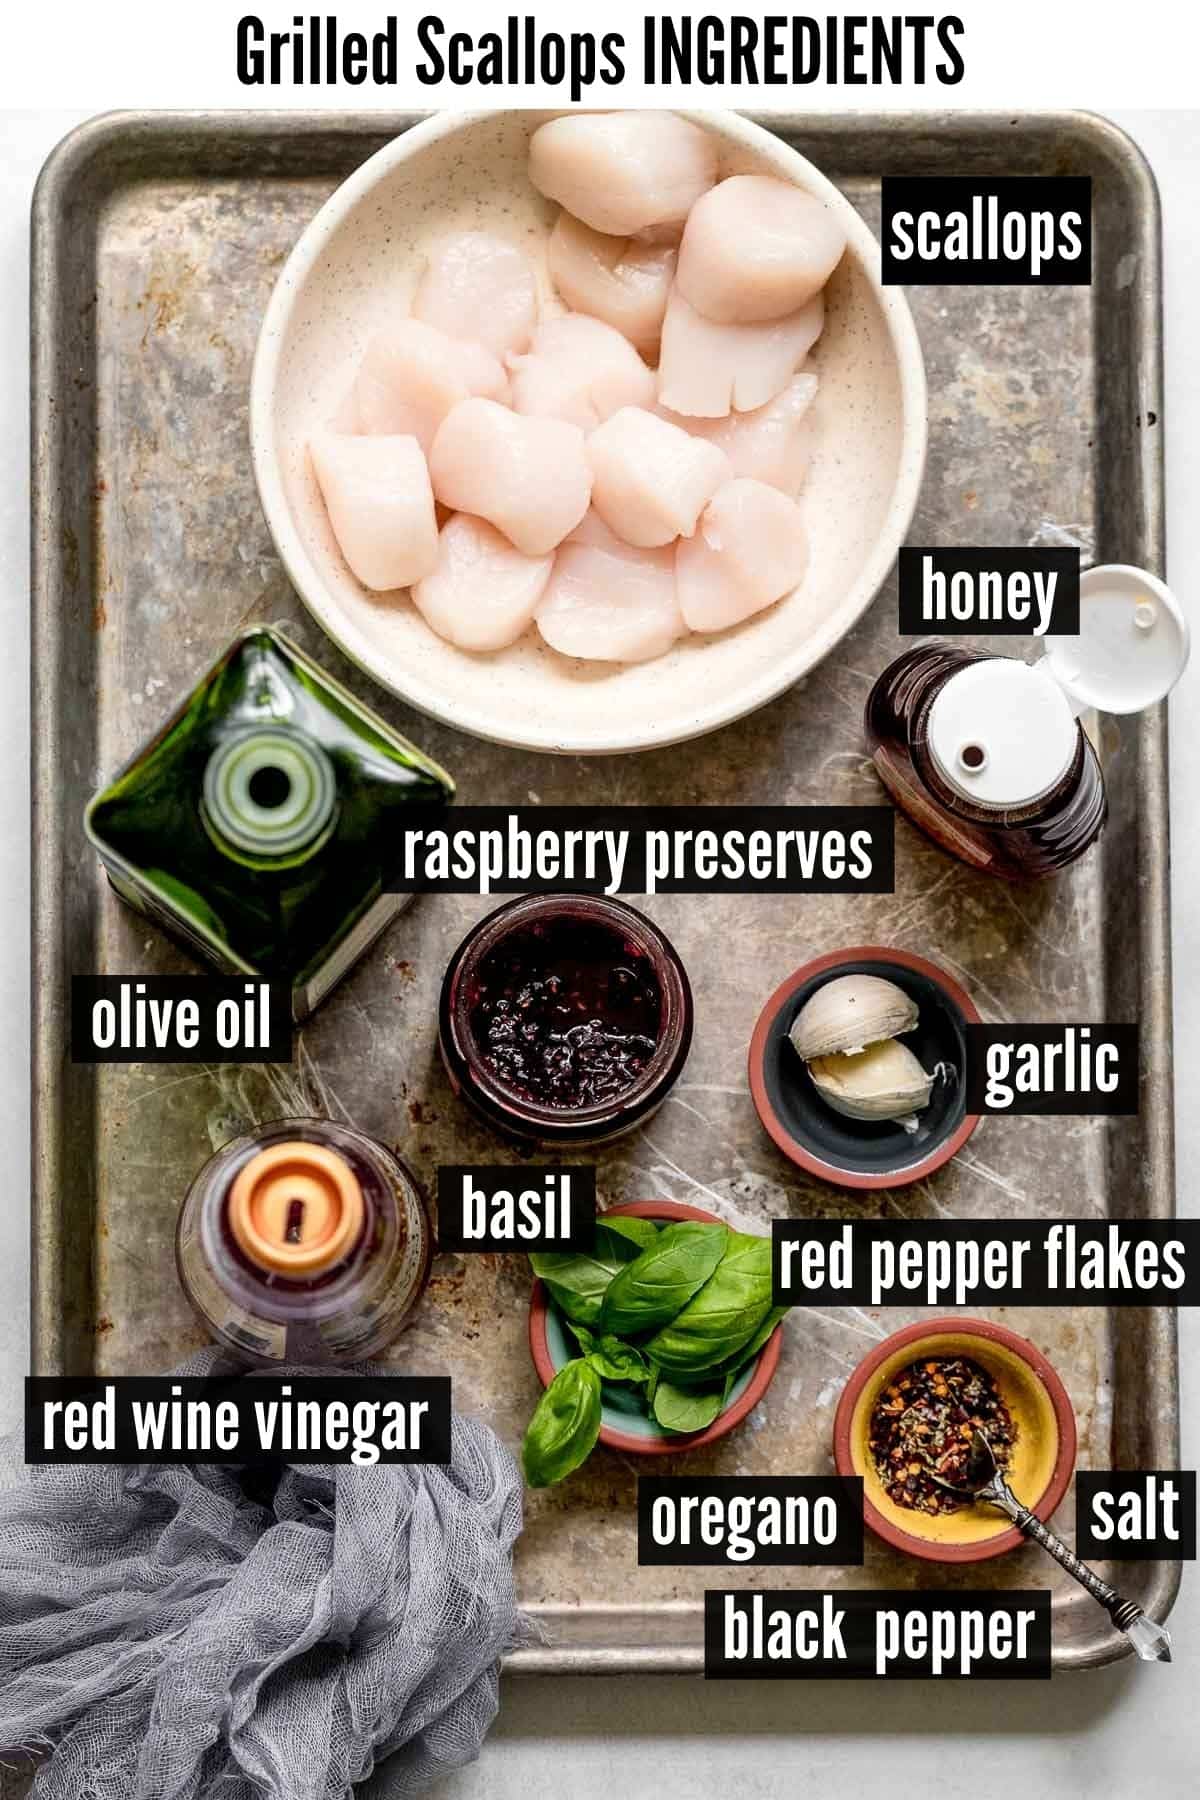 grilled scallops labelled ingredients.